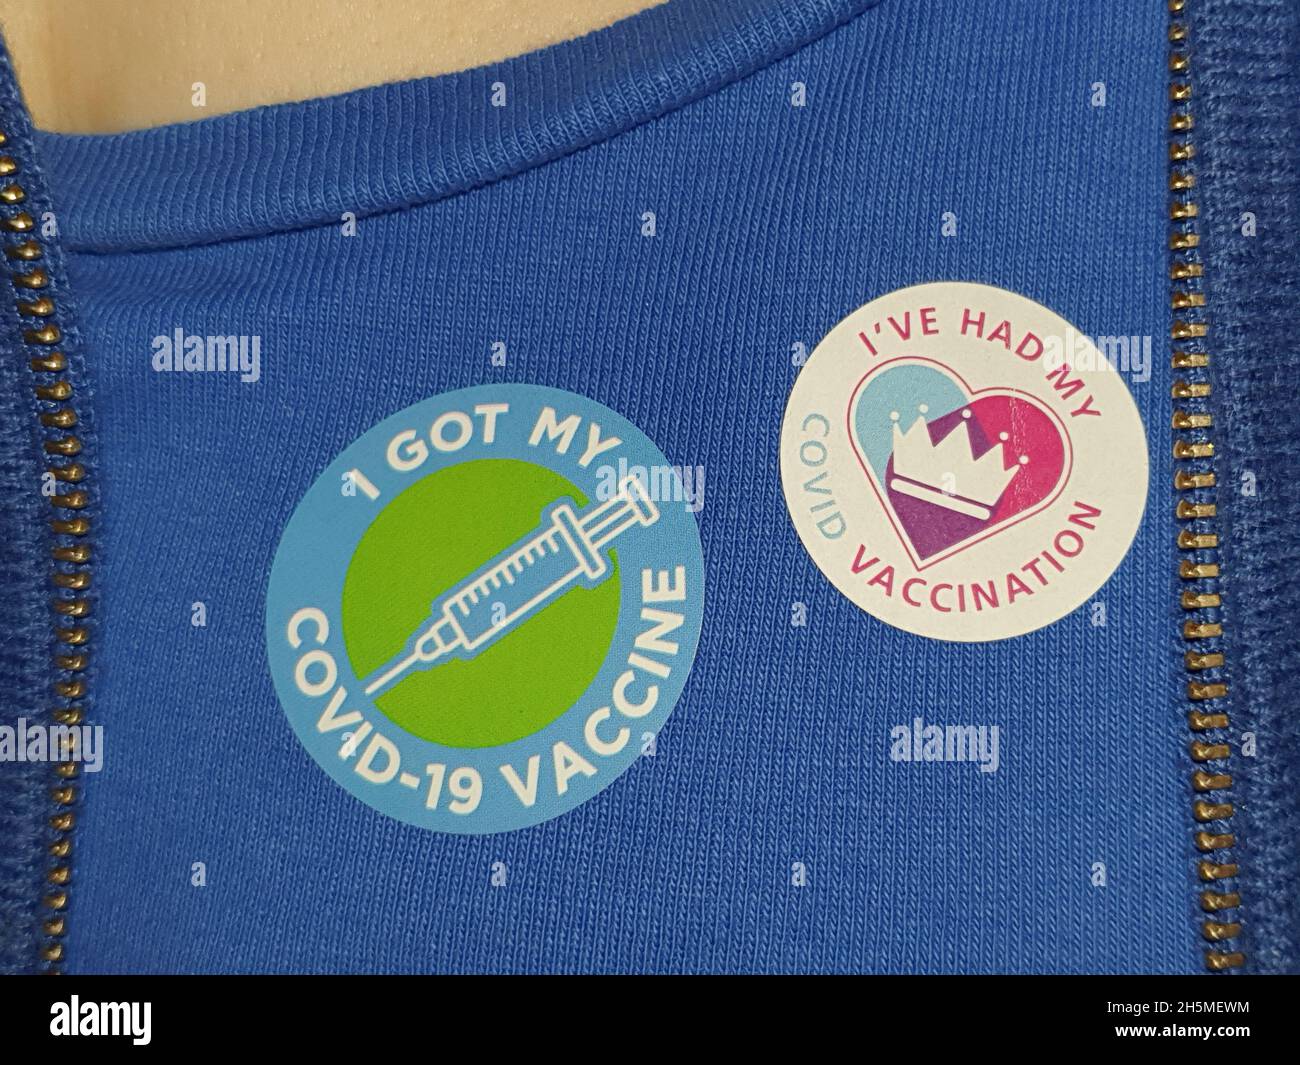 London, UK, 10 November 2021: at a vaccination centre next to Kennington Oval cricket ground a steady stream of people attend to get their booster jabs or first jabs of Pfizer coronavirus vaccine. After the vaccination there is the gift of a sticker, to encourage others to get their vaccine too. Anna Watson/Alamy Live News Stock Photo